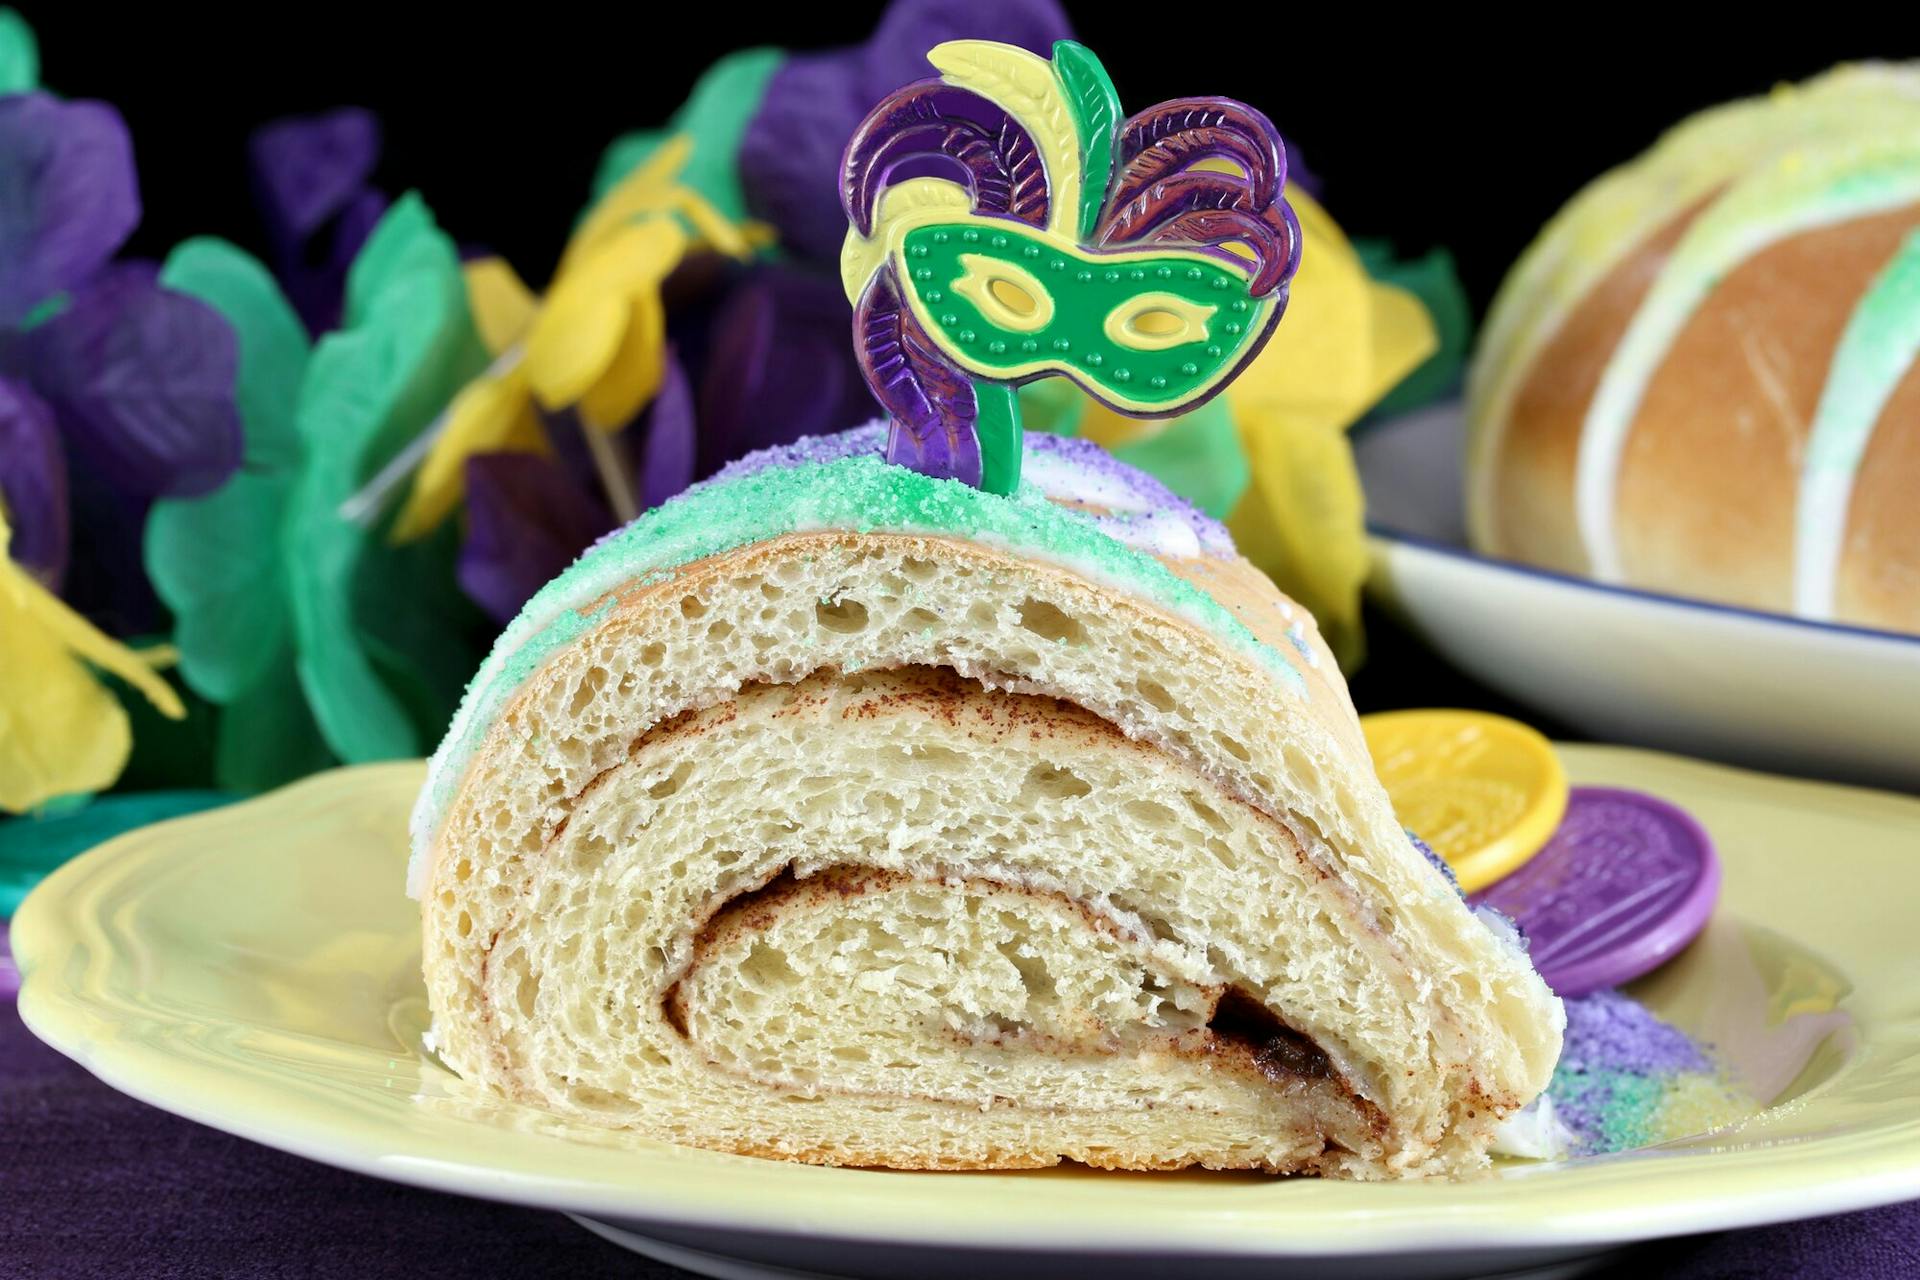 Mardi Gras Promotions & Offers for Your Restaurant